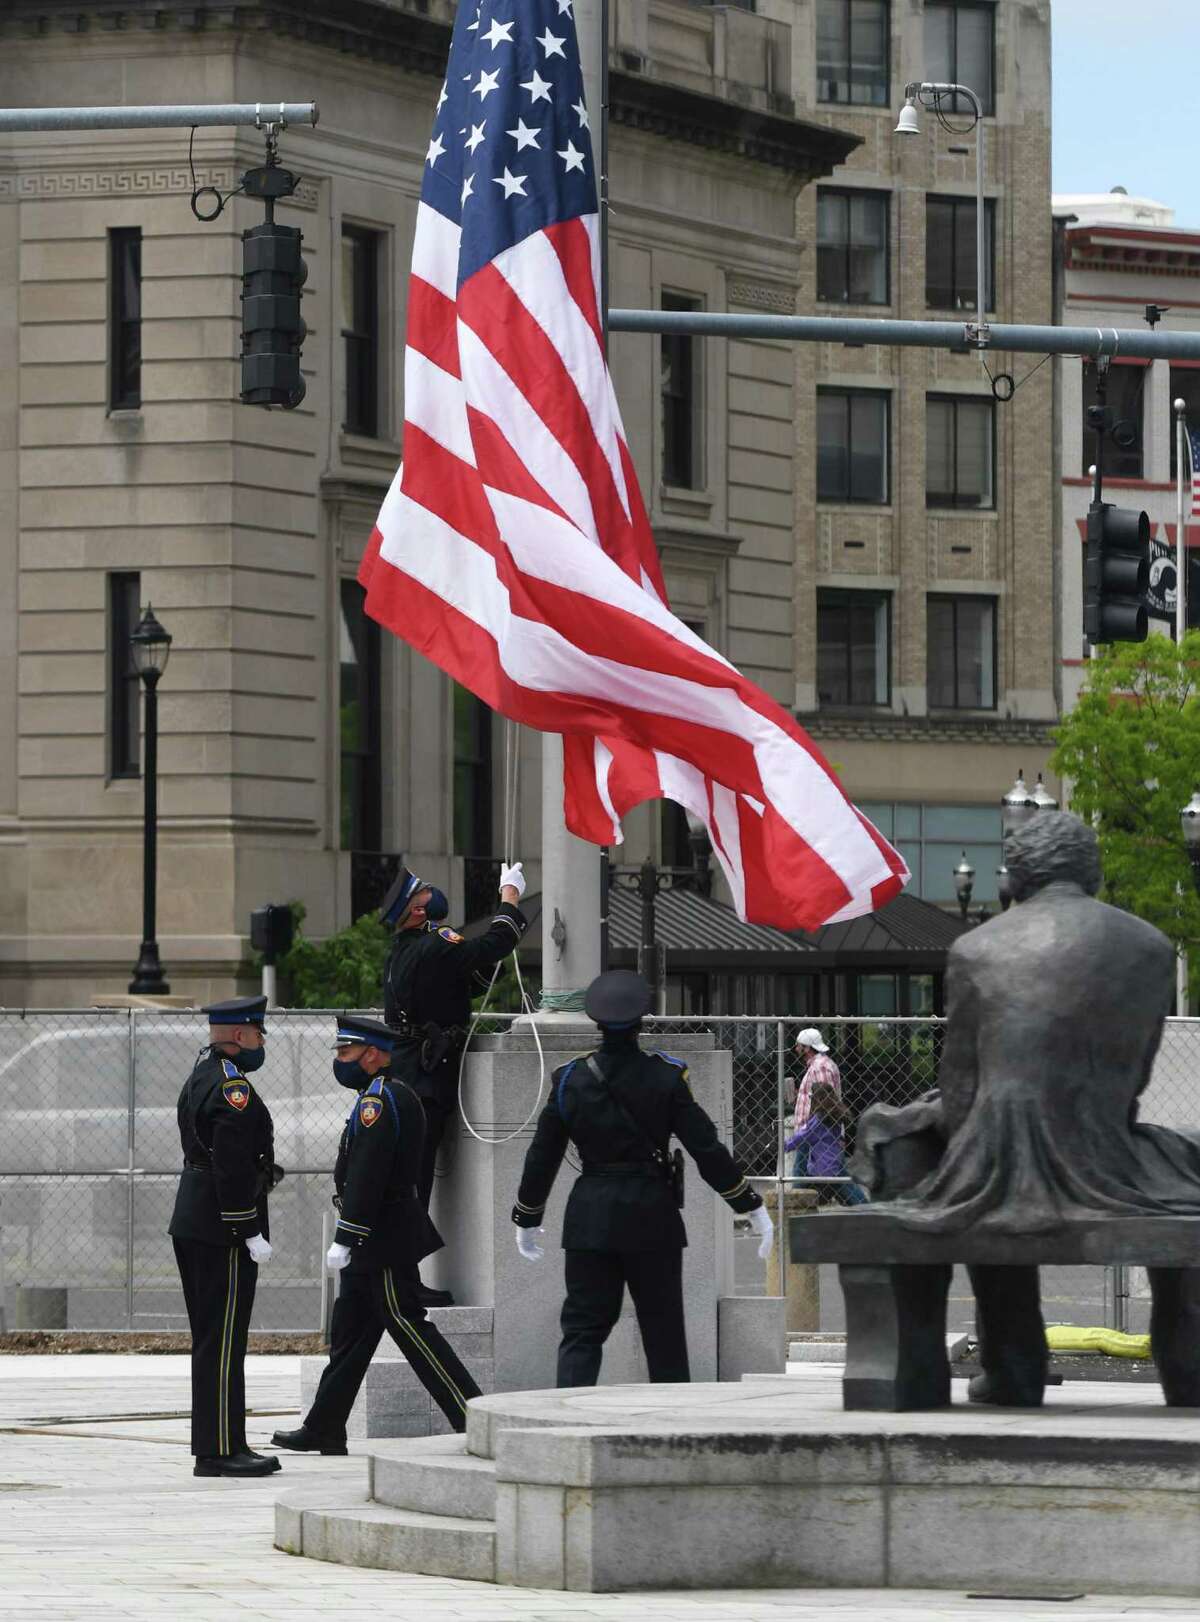 Stamford Memorial Day parade, ceremony rescheduled for June 13